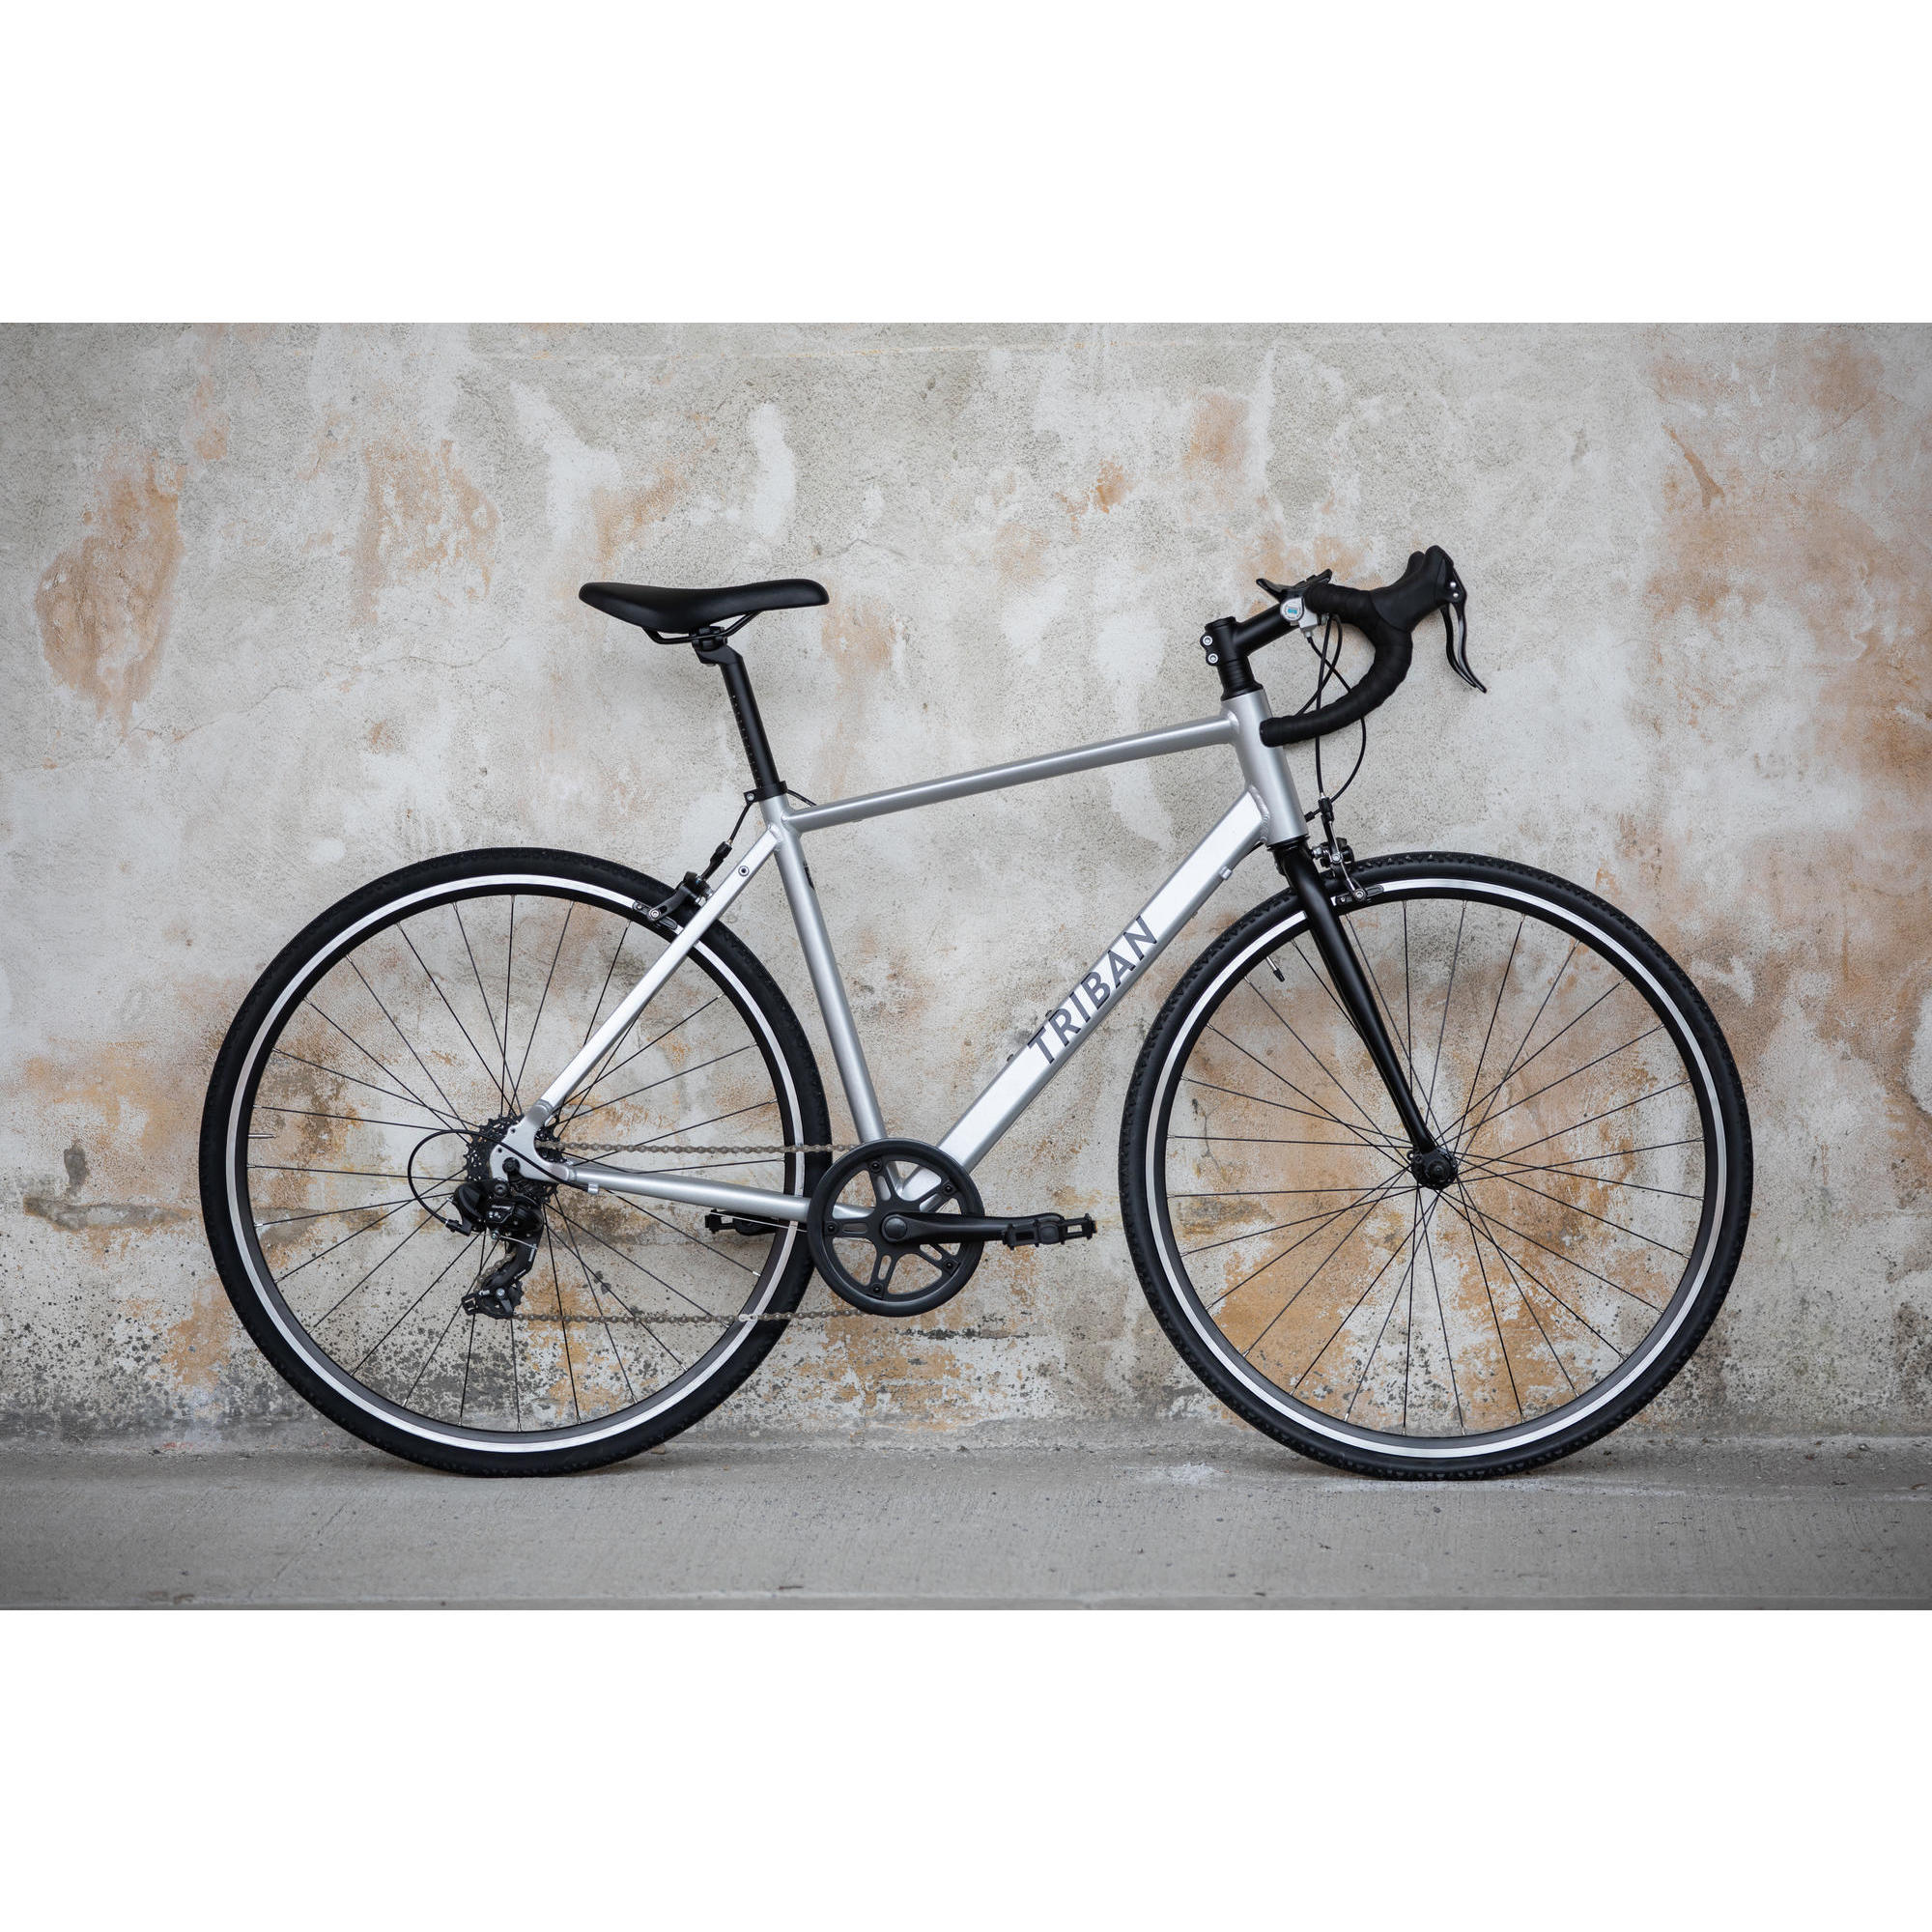 btwin rc100